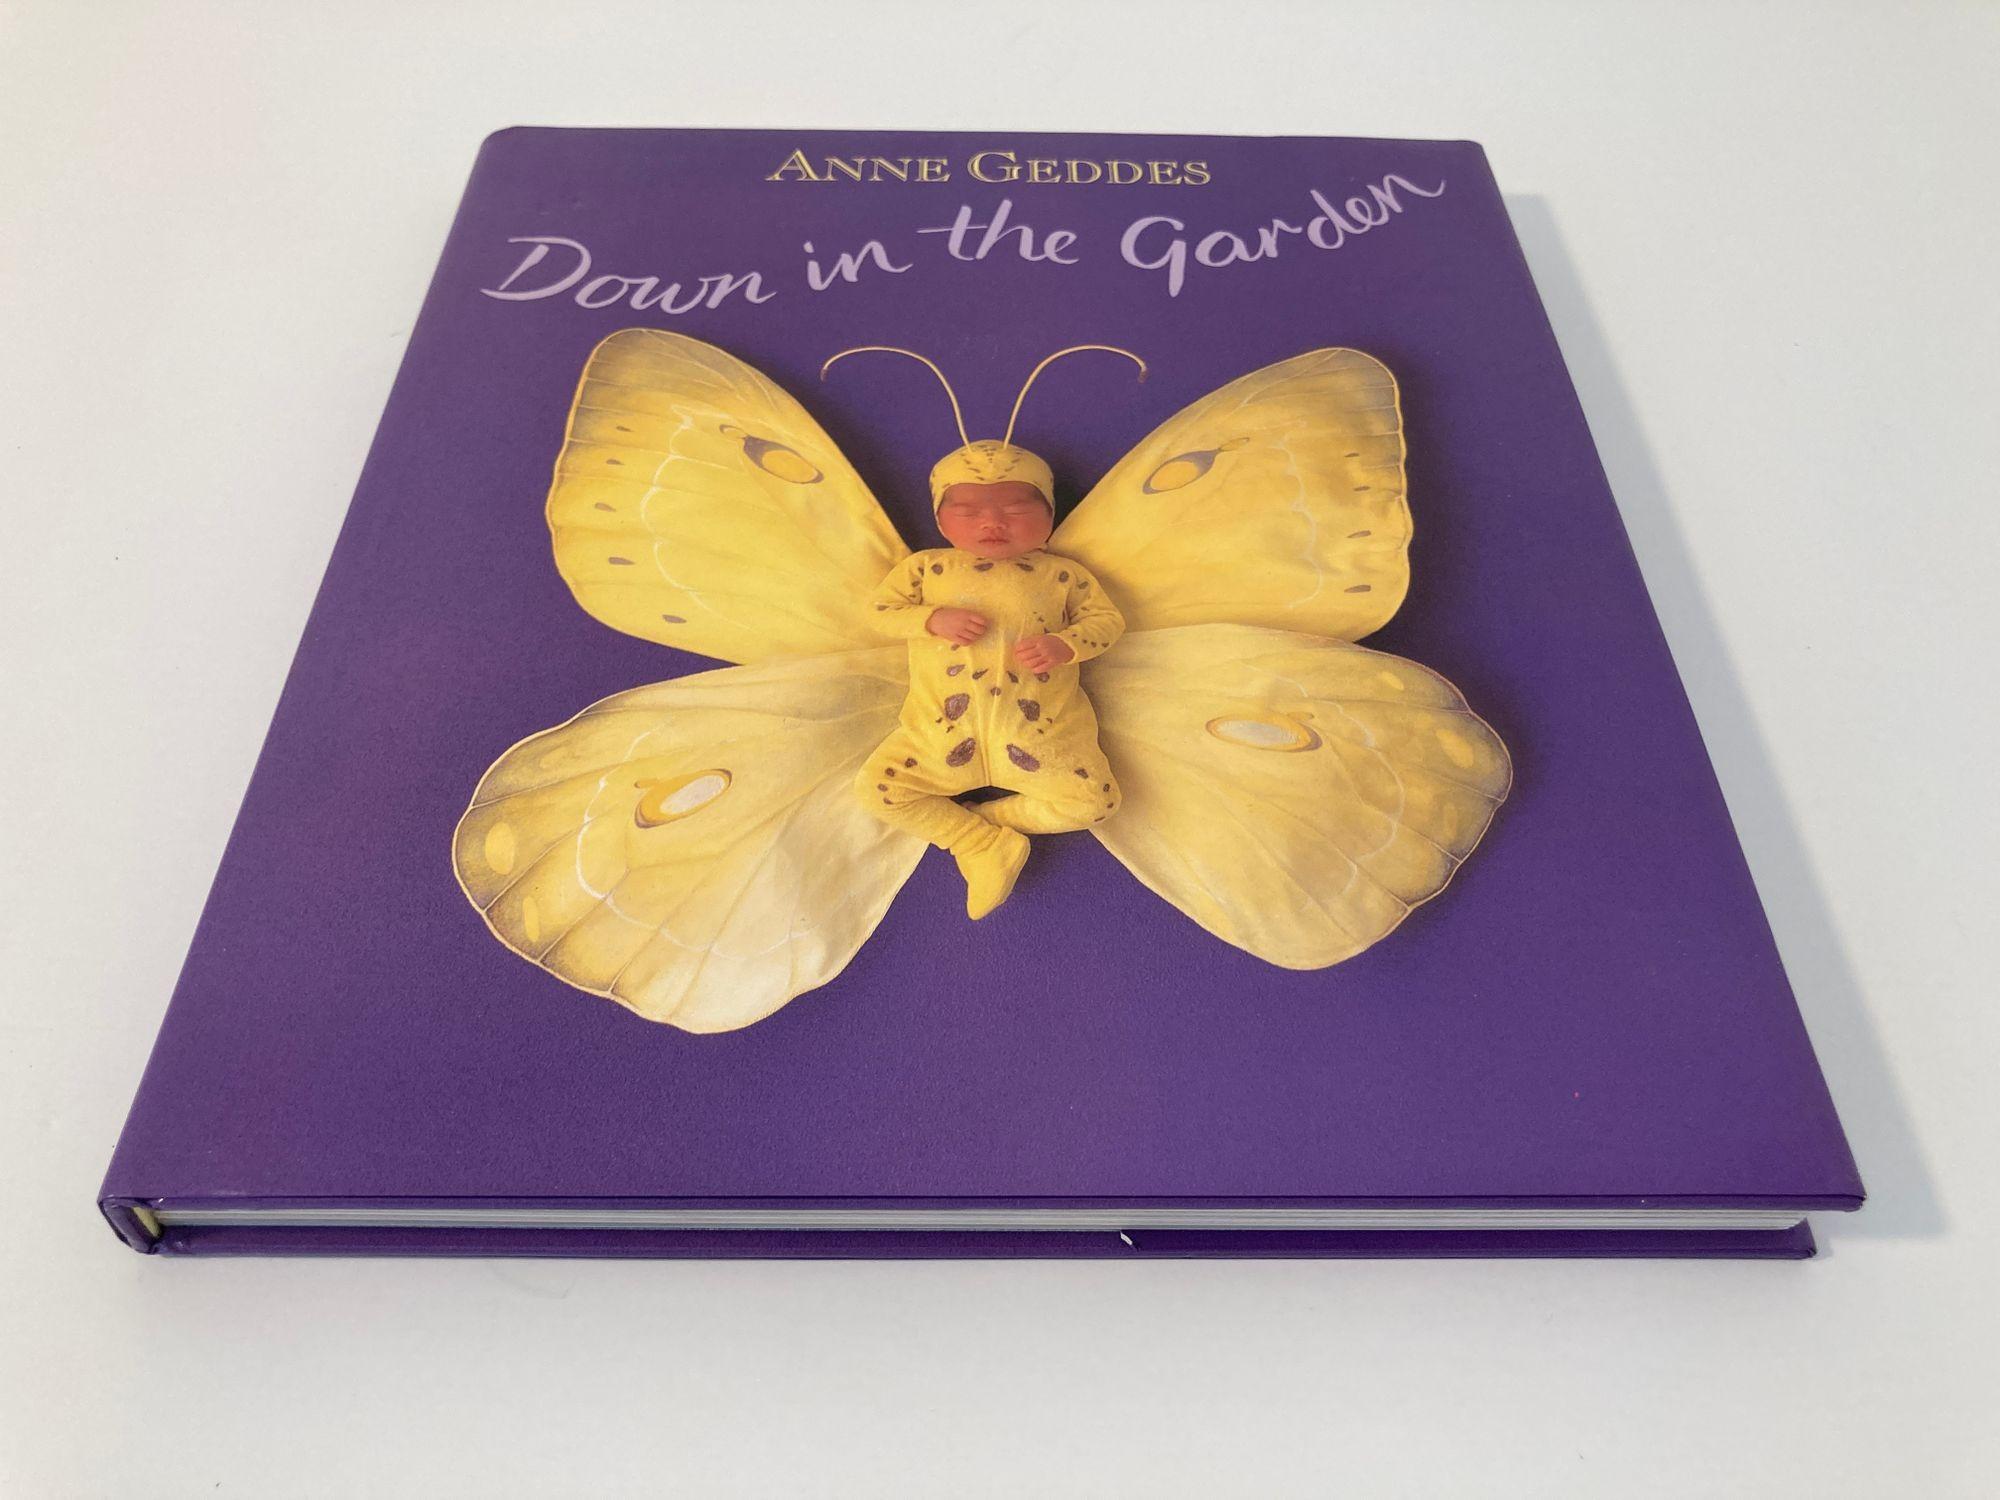 Anne Geddes Down in The Garden Hardcover 1996.
Anne Geddes DOWN IN THE GARDEN large hardcover coffee table book with dust jacket.
Synopsis:
Presents a collection of photographs featuring babies costumed to resemble creatures and plants found in the